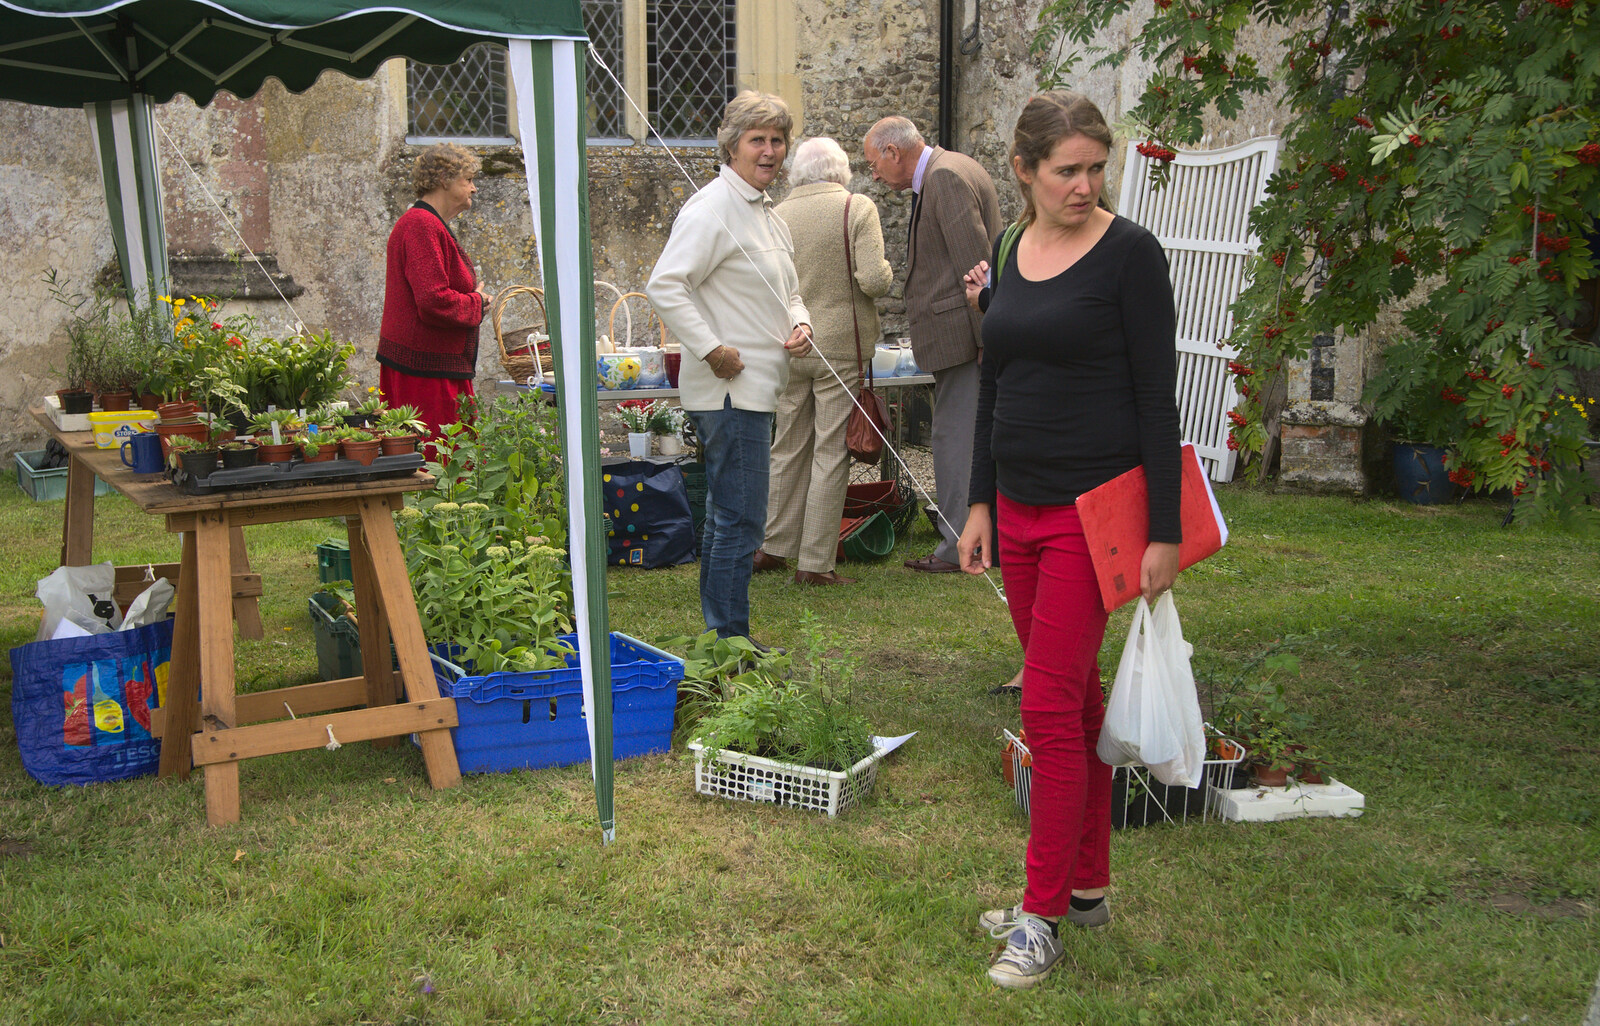 Isobel roams around in skinny red jeans from The Oaksmere, and the Gislingham Flower Festival, Suffolk - 24th August 2014